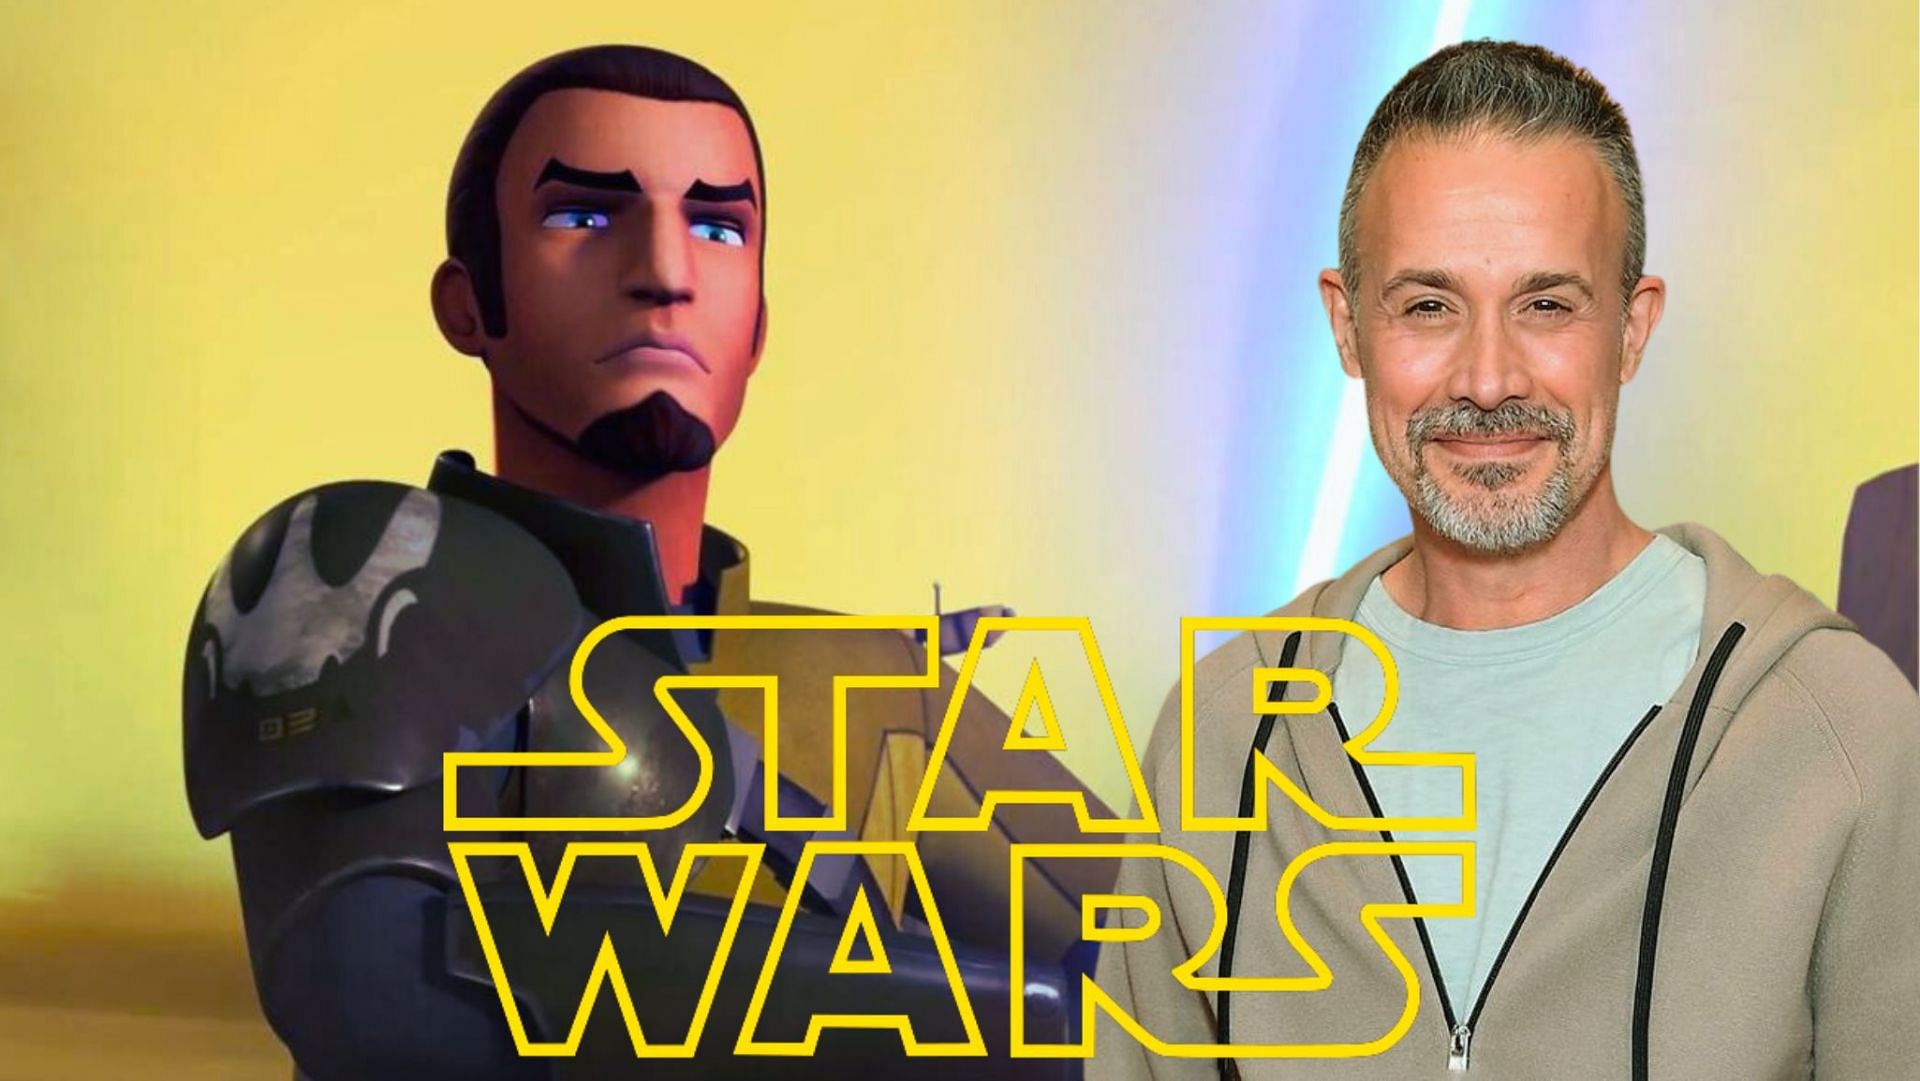 Freddie Prinze Jr. played the role of Kanan Jarrus in the Star Wars animated series, but has expressed his lack of interest in reprising the character in live-action (Image via Sportskeeda)